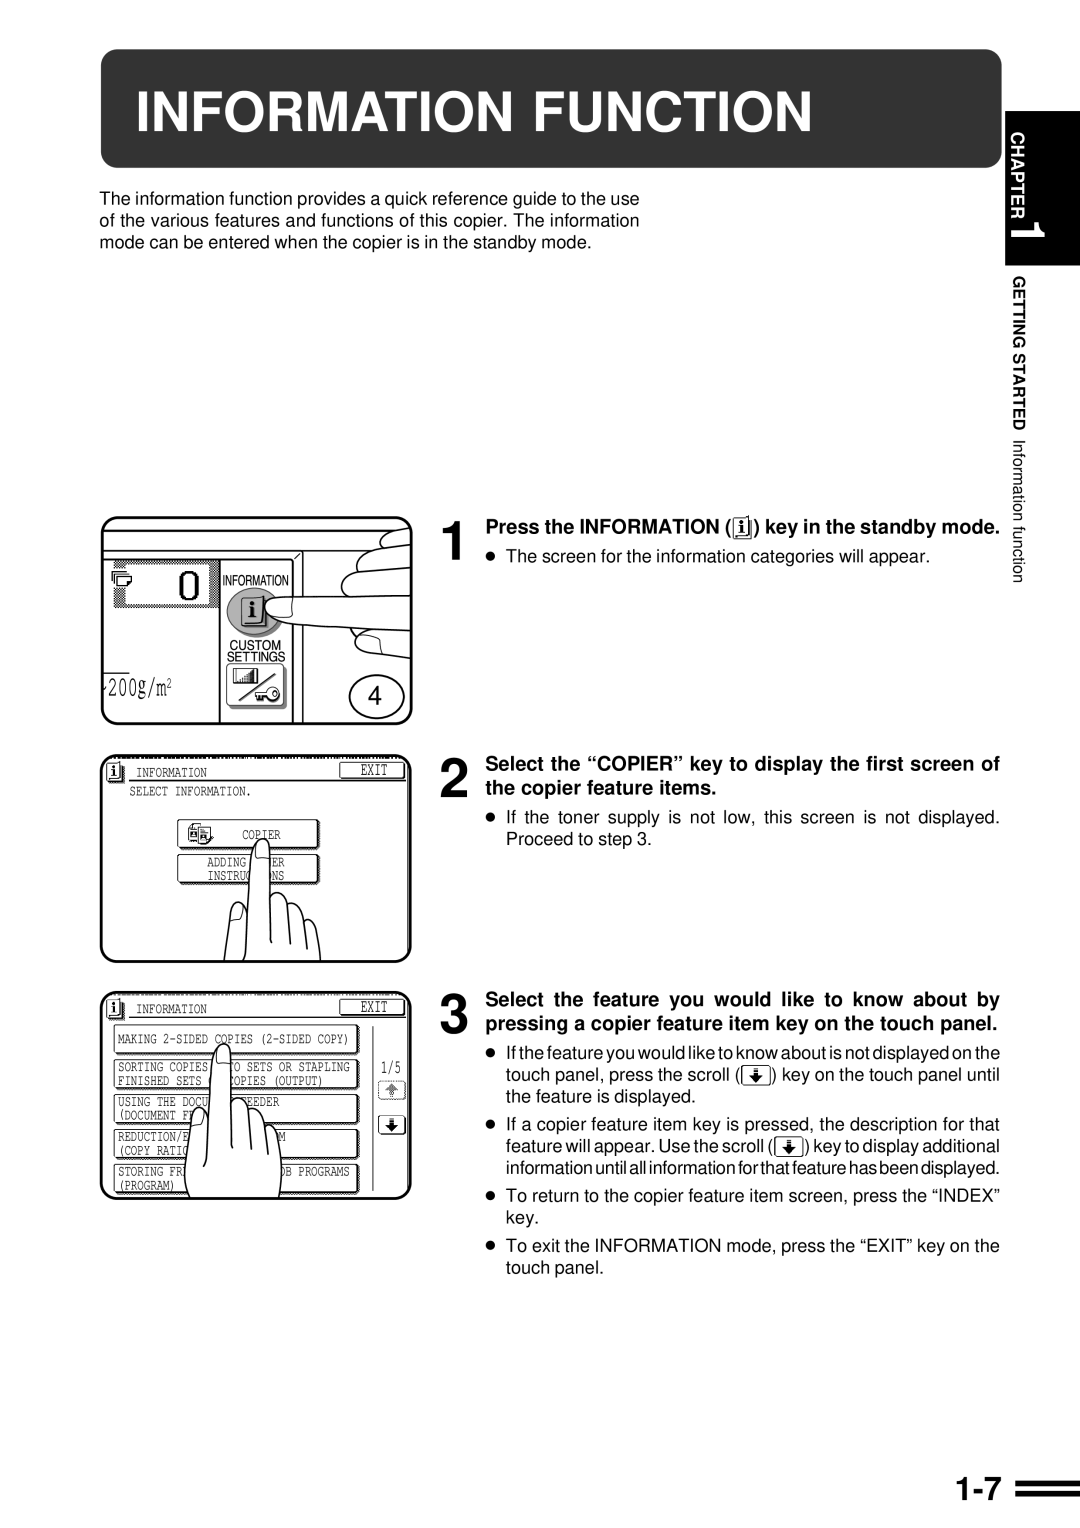 Sharp AR-507 operation manual Information Function, ~200g/m2, Press the INFORMATION key in the standby mode 